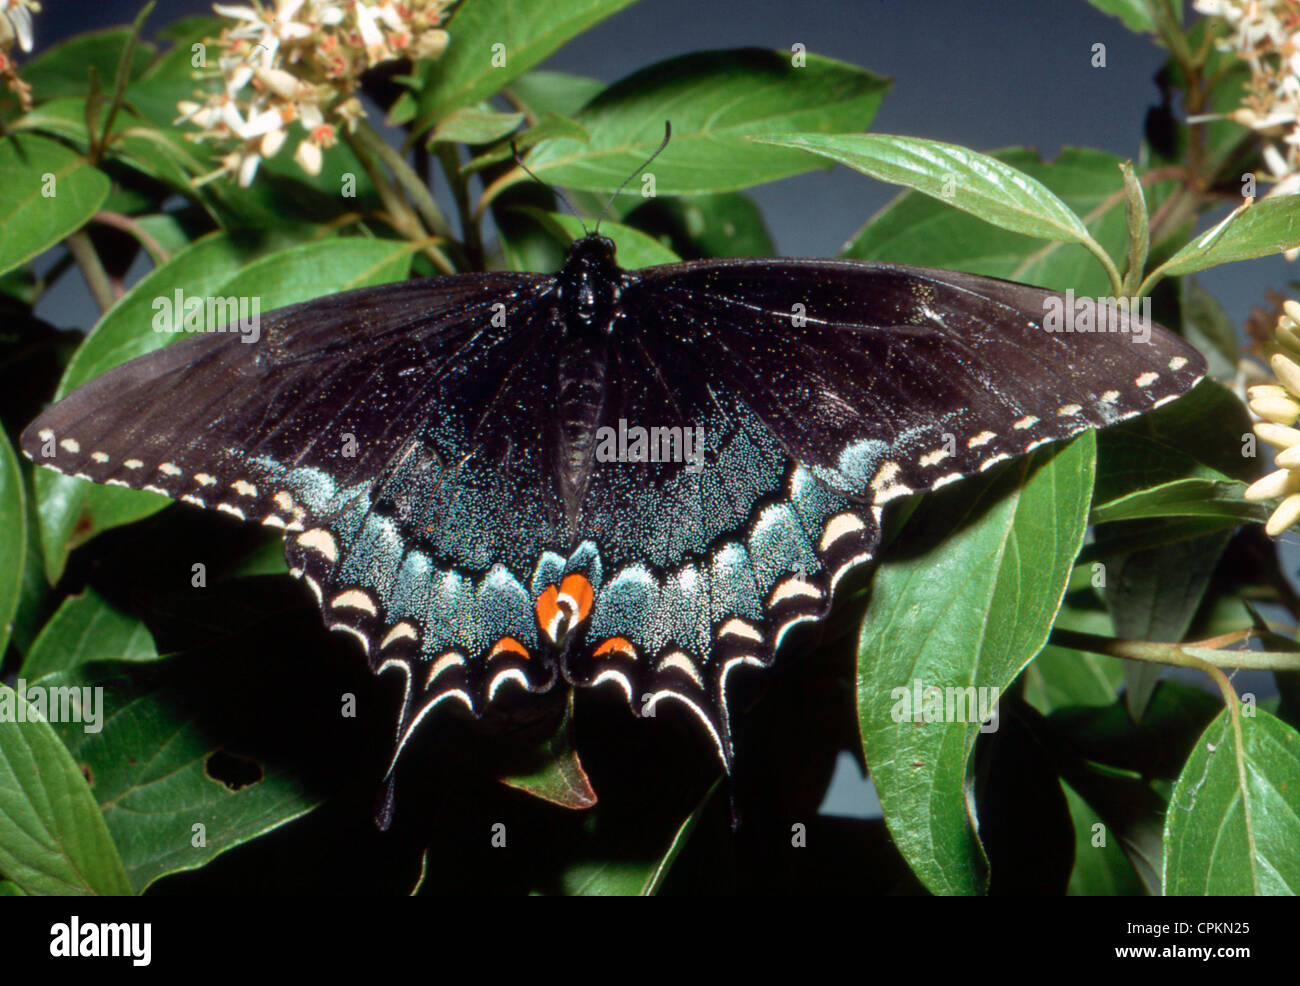 Eastern black swallowtail butterfly perched on leaves in summer, Missouri USA Stock Photo